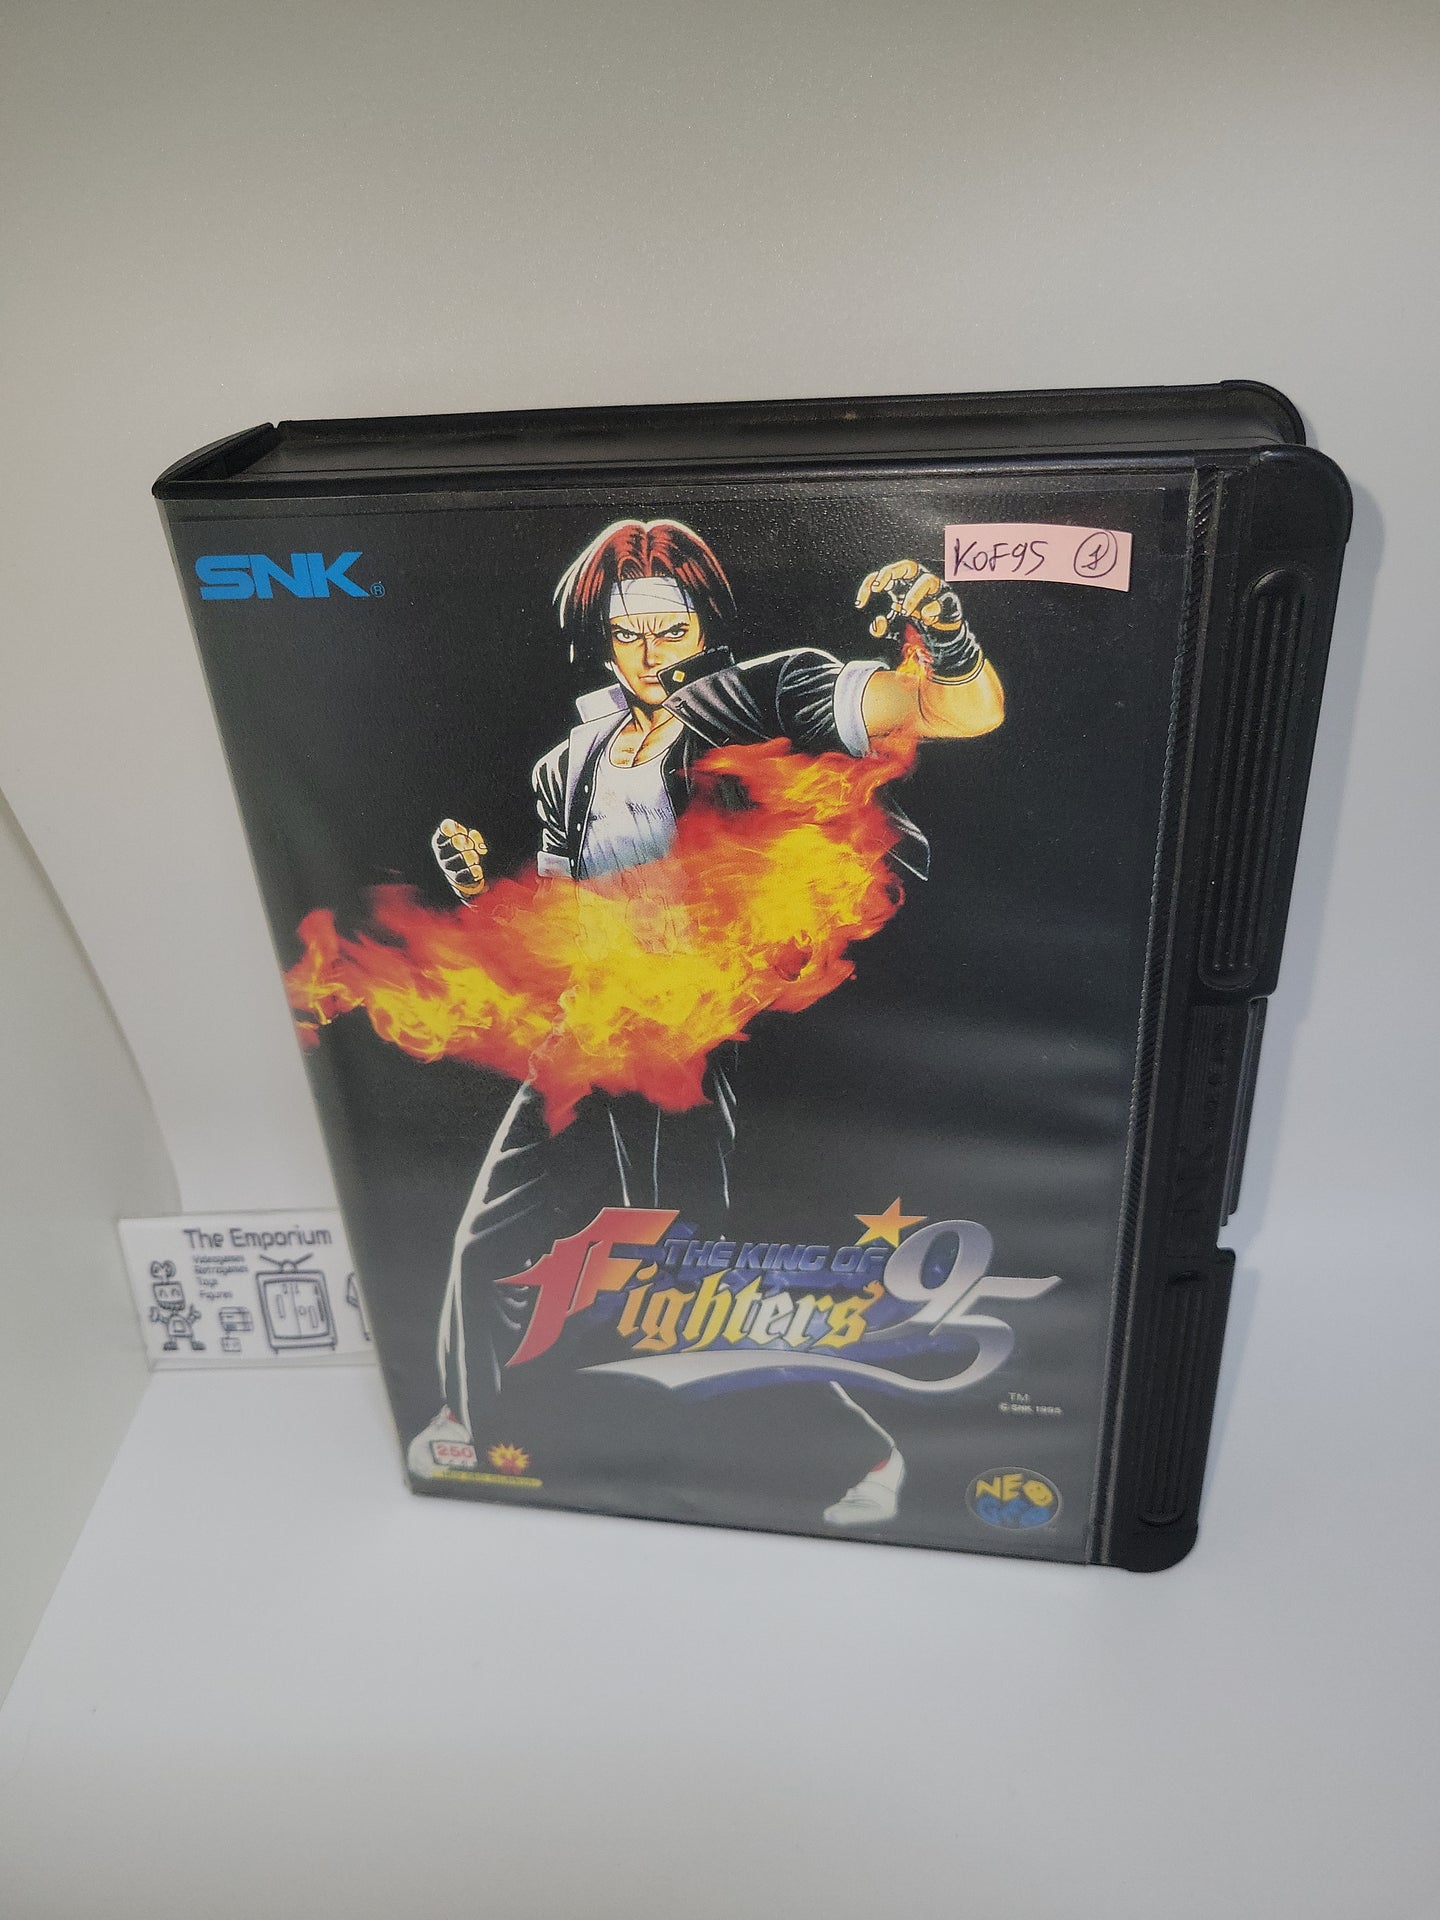 The King of Fighters 95 - Snk Neogeo AES NG